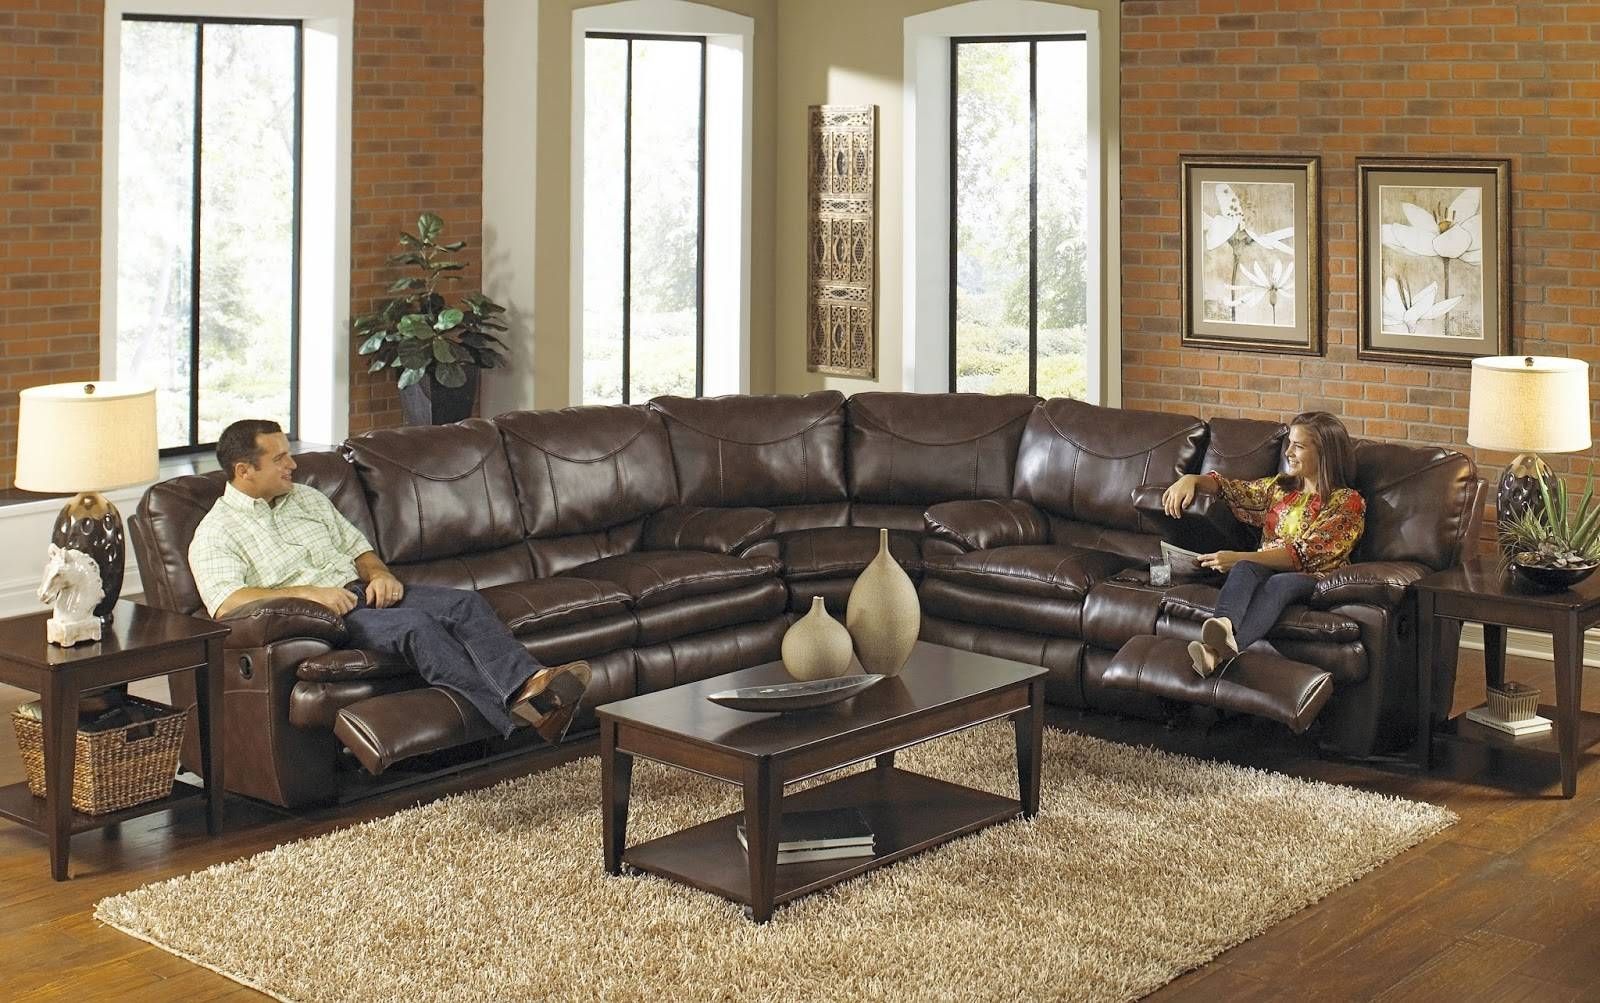 Albany Industries Sectional Sofa | Interior Design Within Albany Industries Sectional Sofa (View 11 of 30)